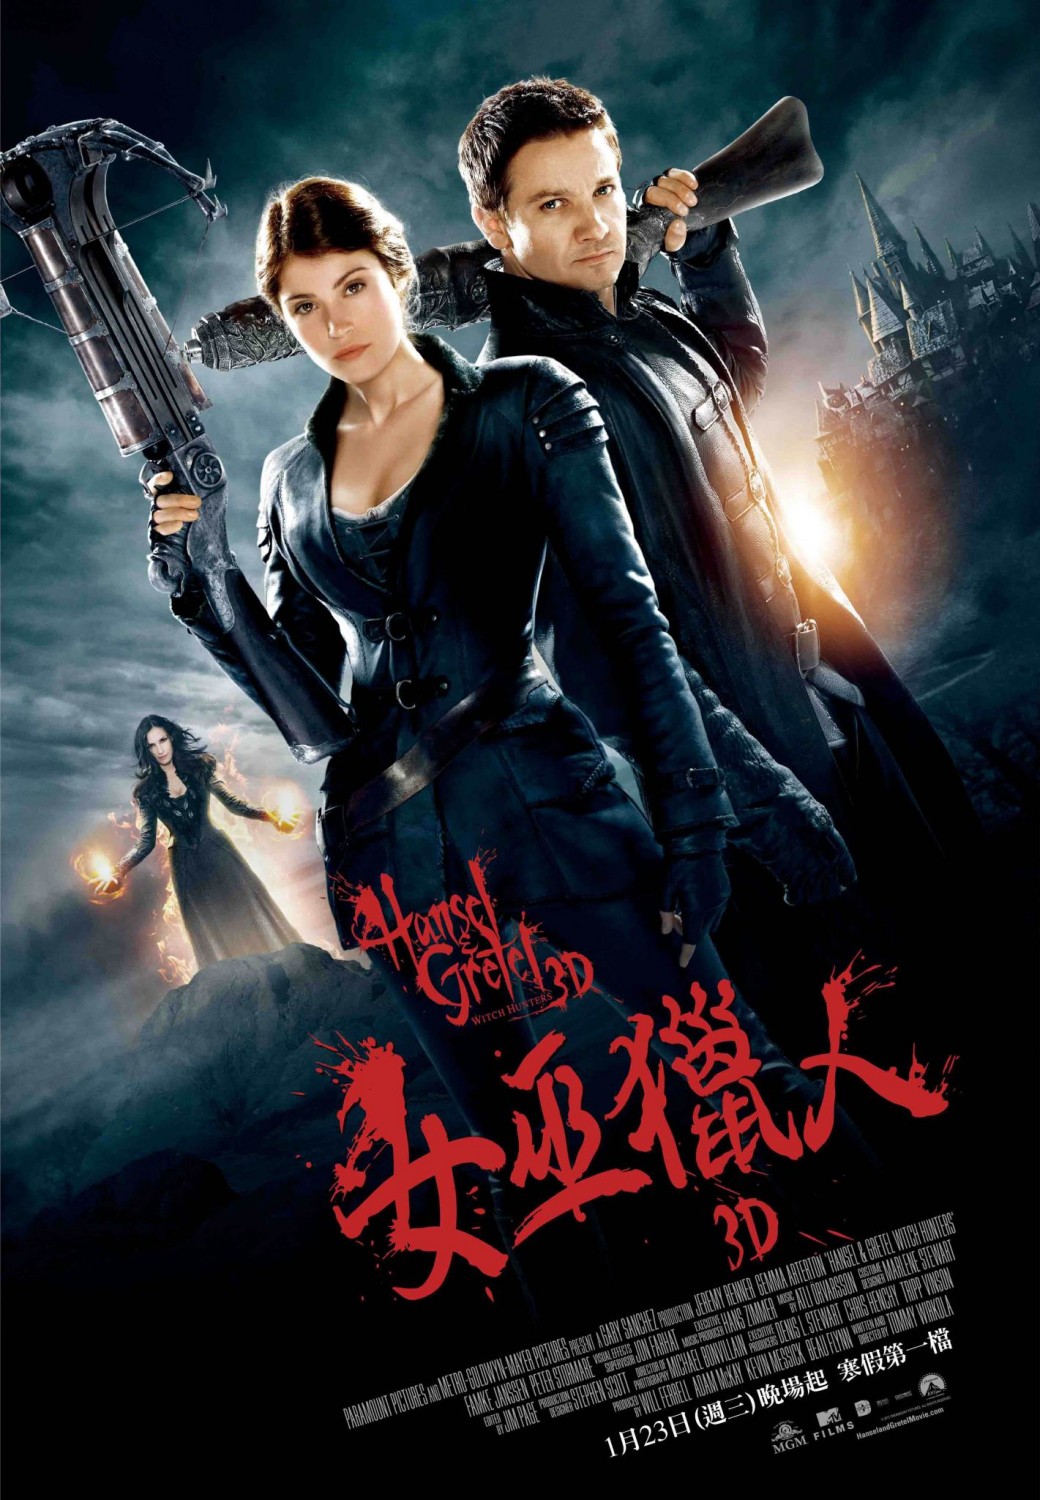 Extra Large Movie Poster Image for Hansel and Gretel: Witch Hunters (#2 of 6)